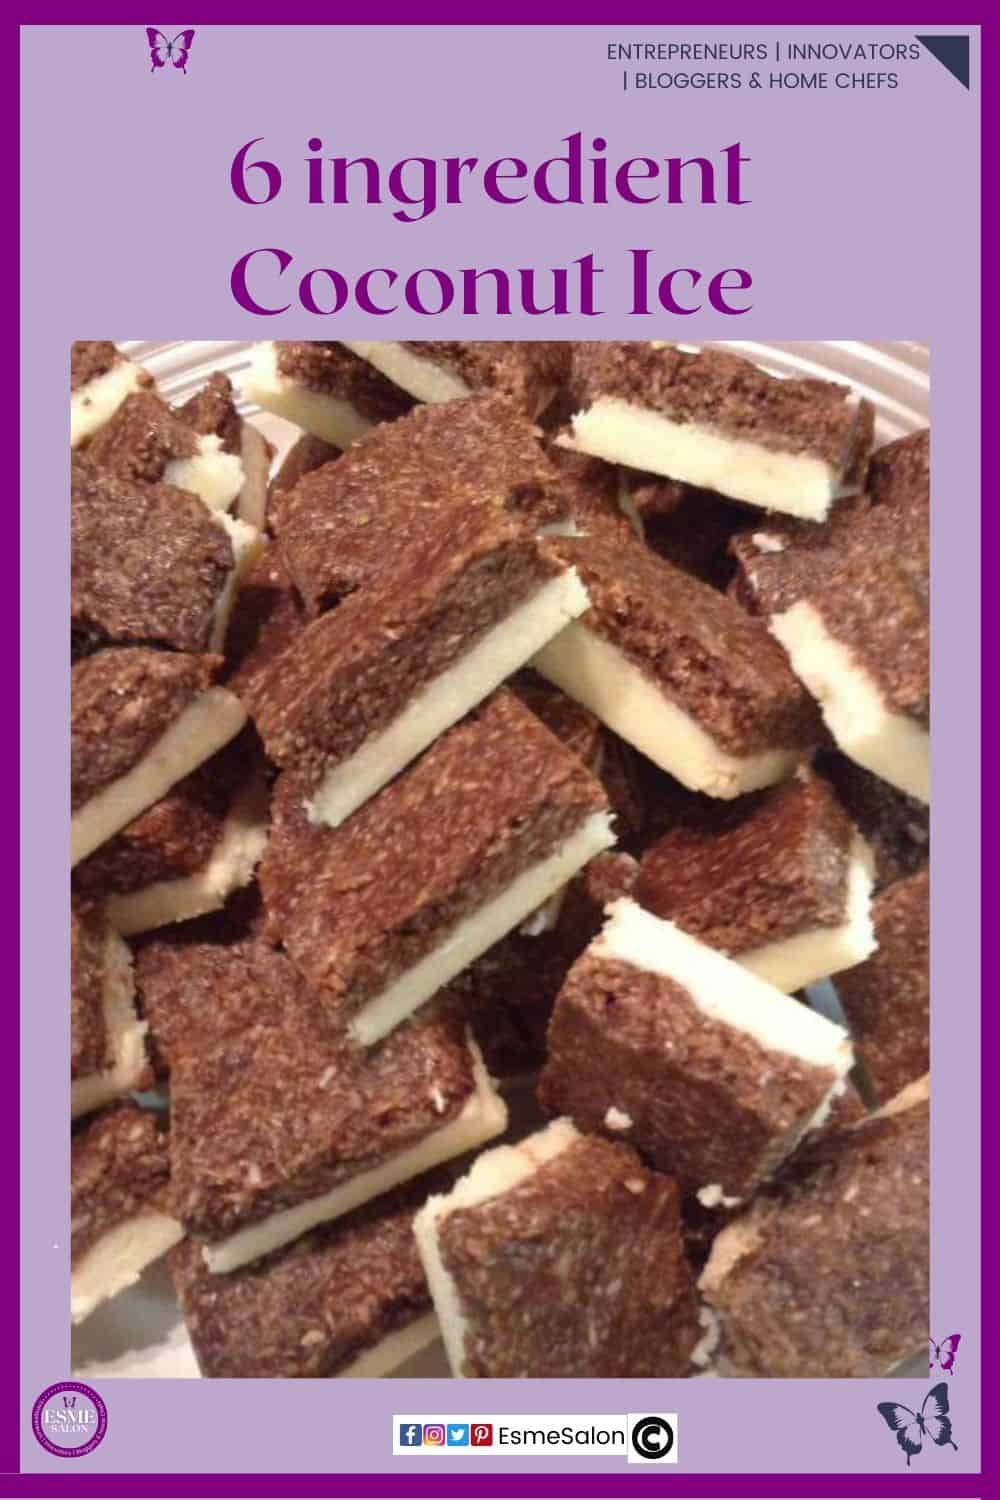 Brown and white Coconut Ice squares on a wooden board